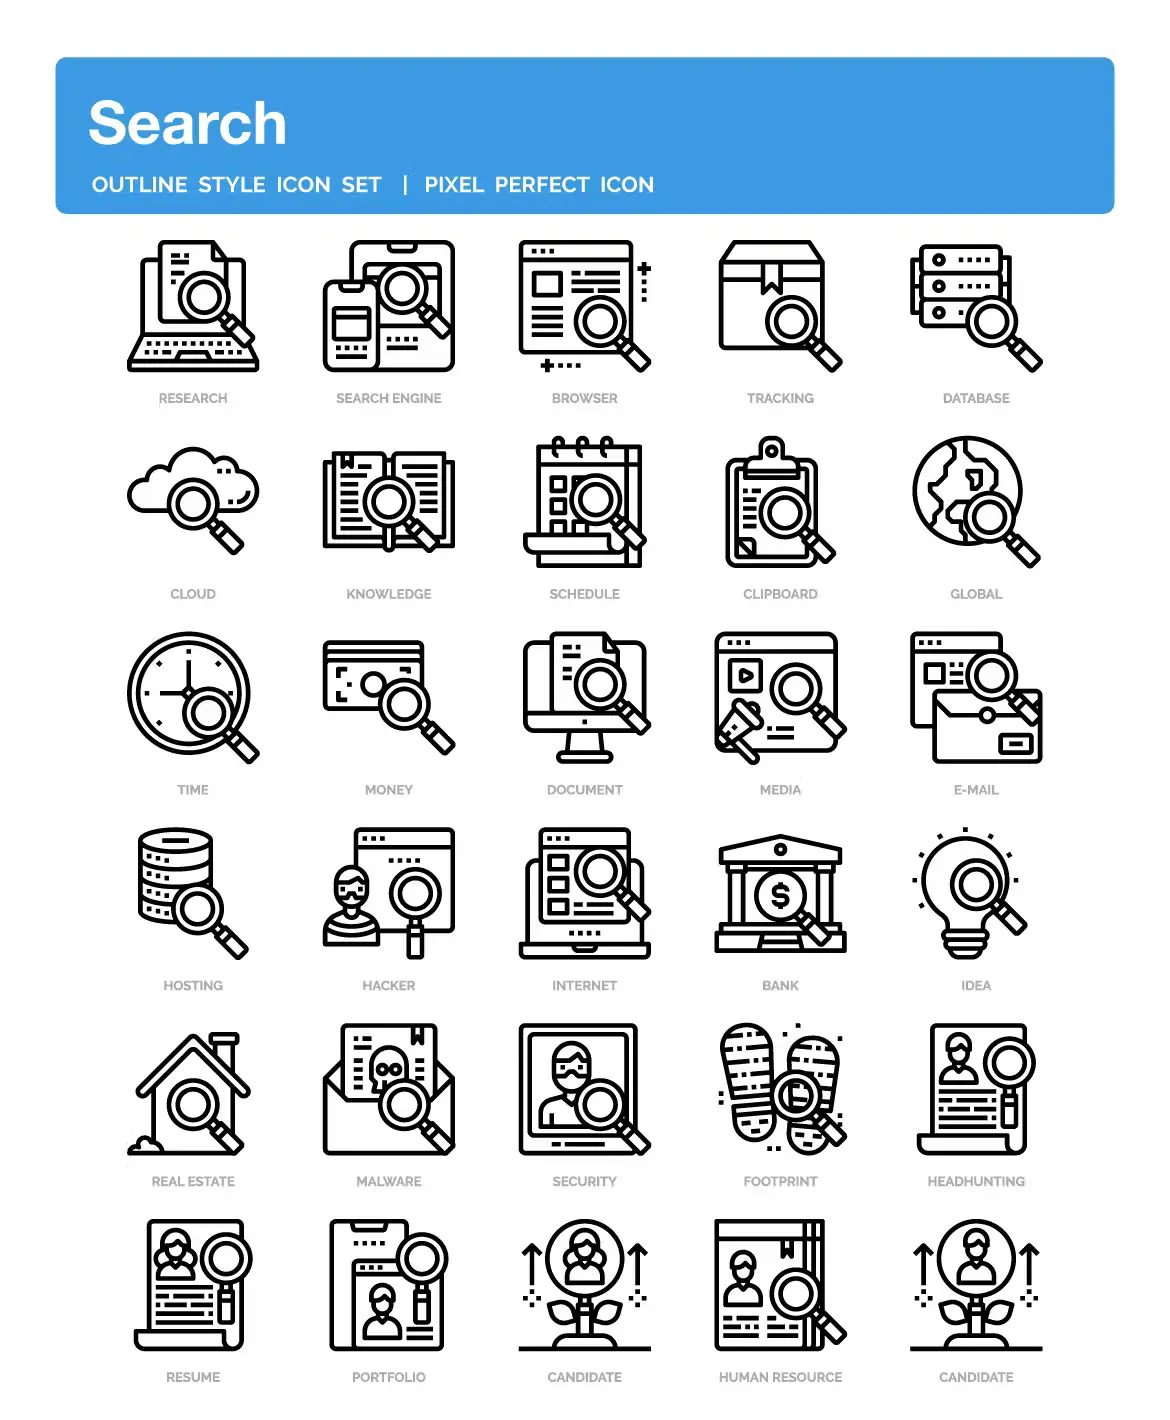 30 Search Icons Pack1